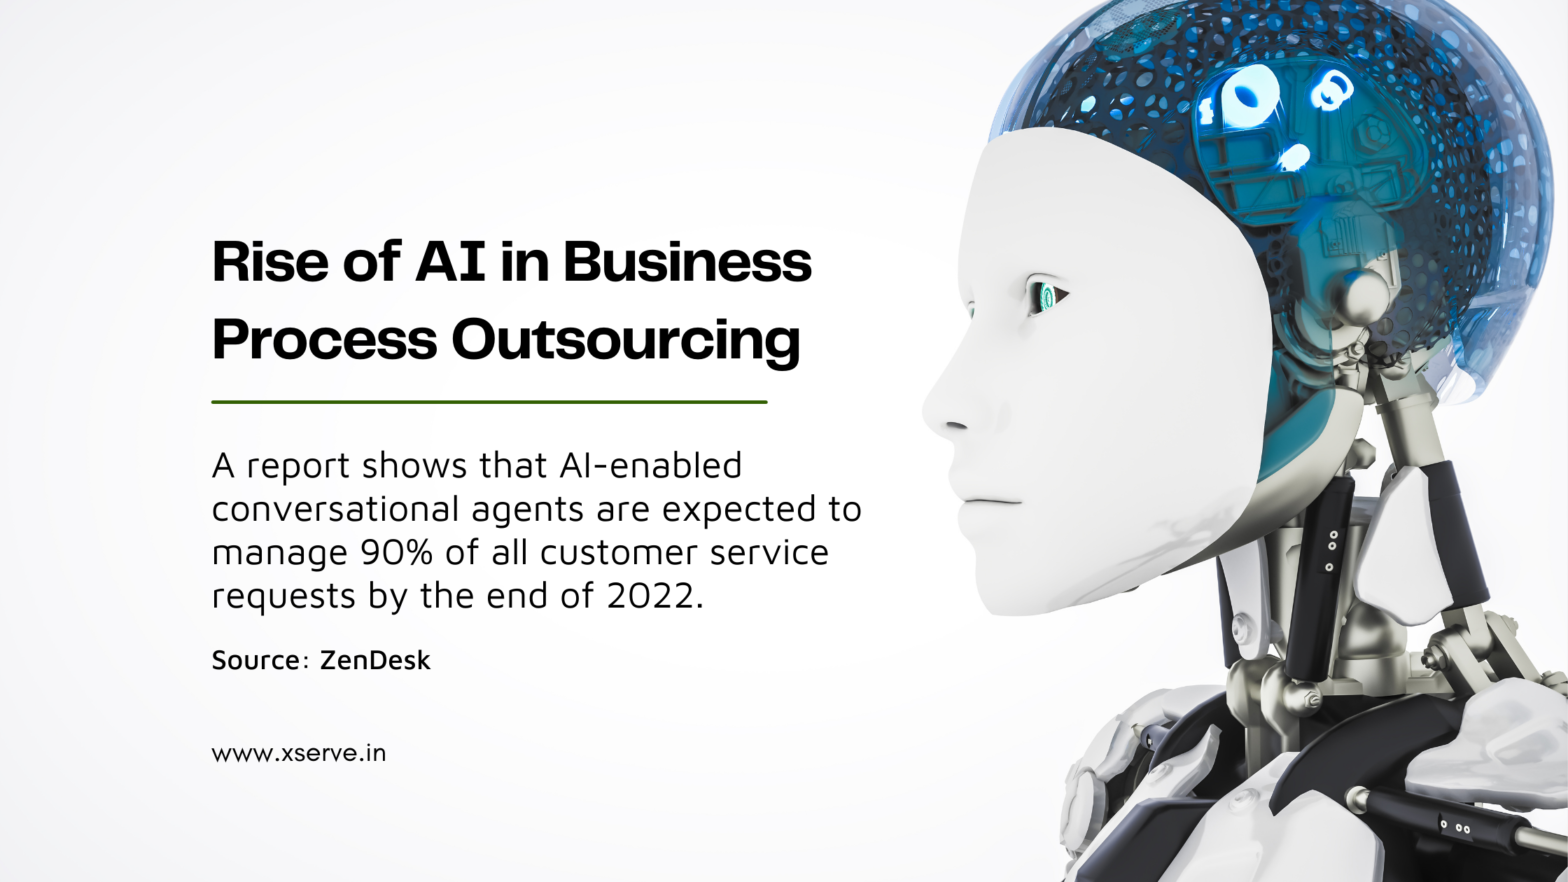 The rise of AI in business process outsourcing